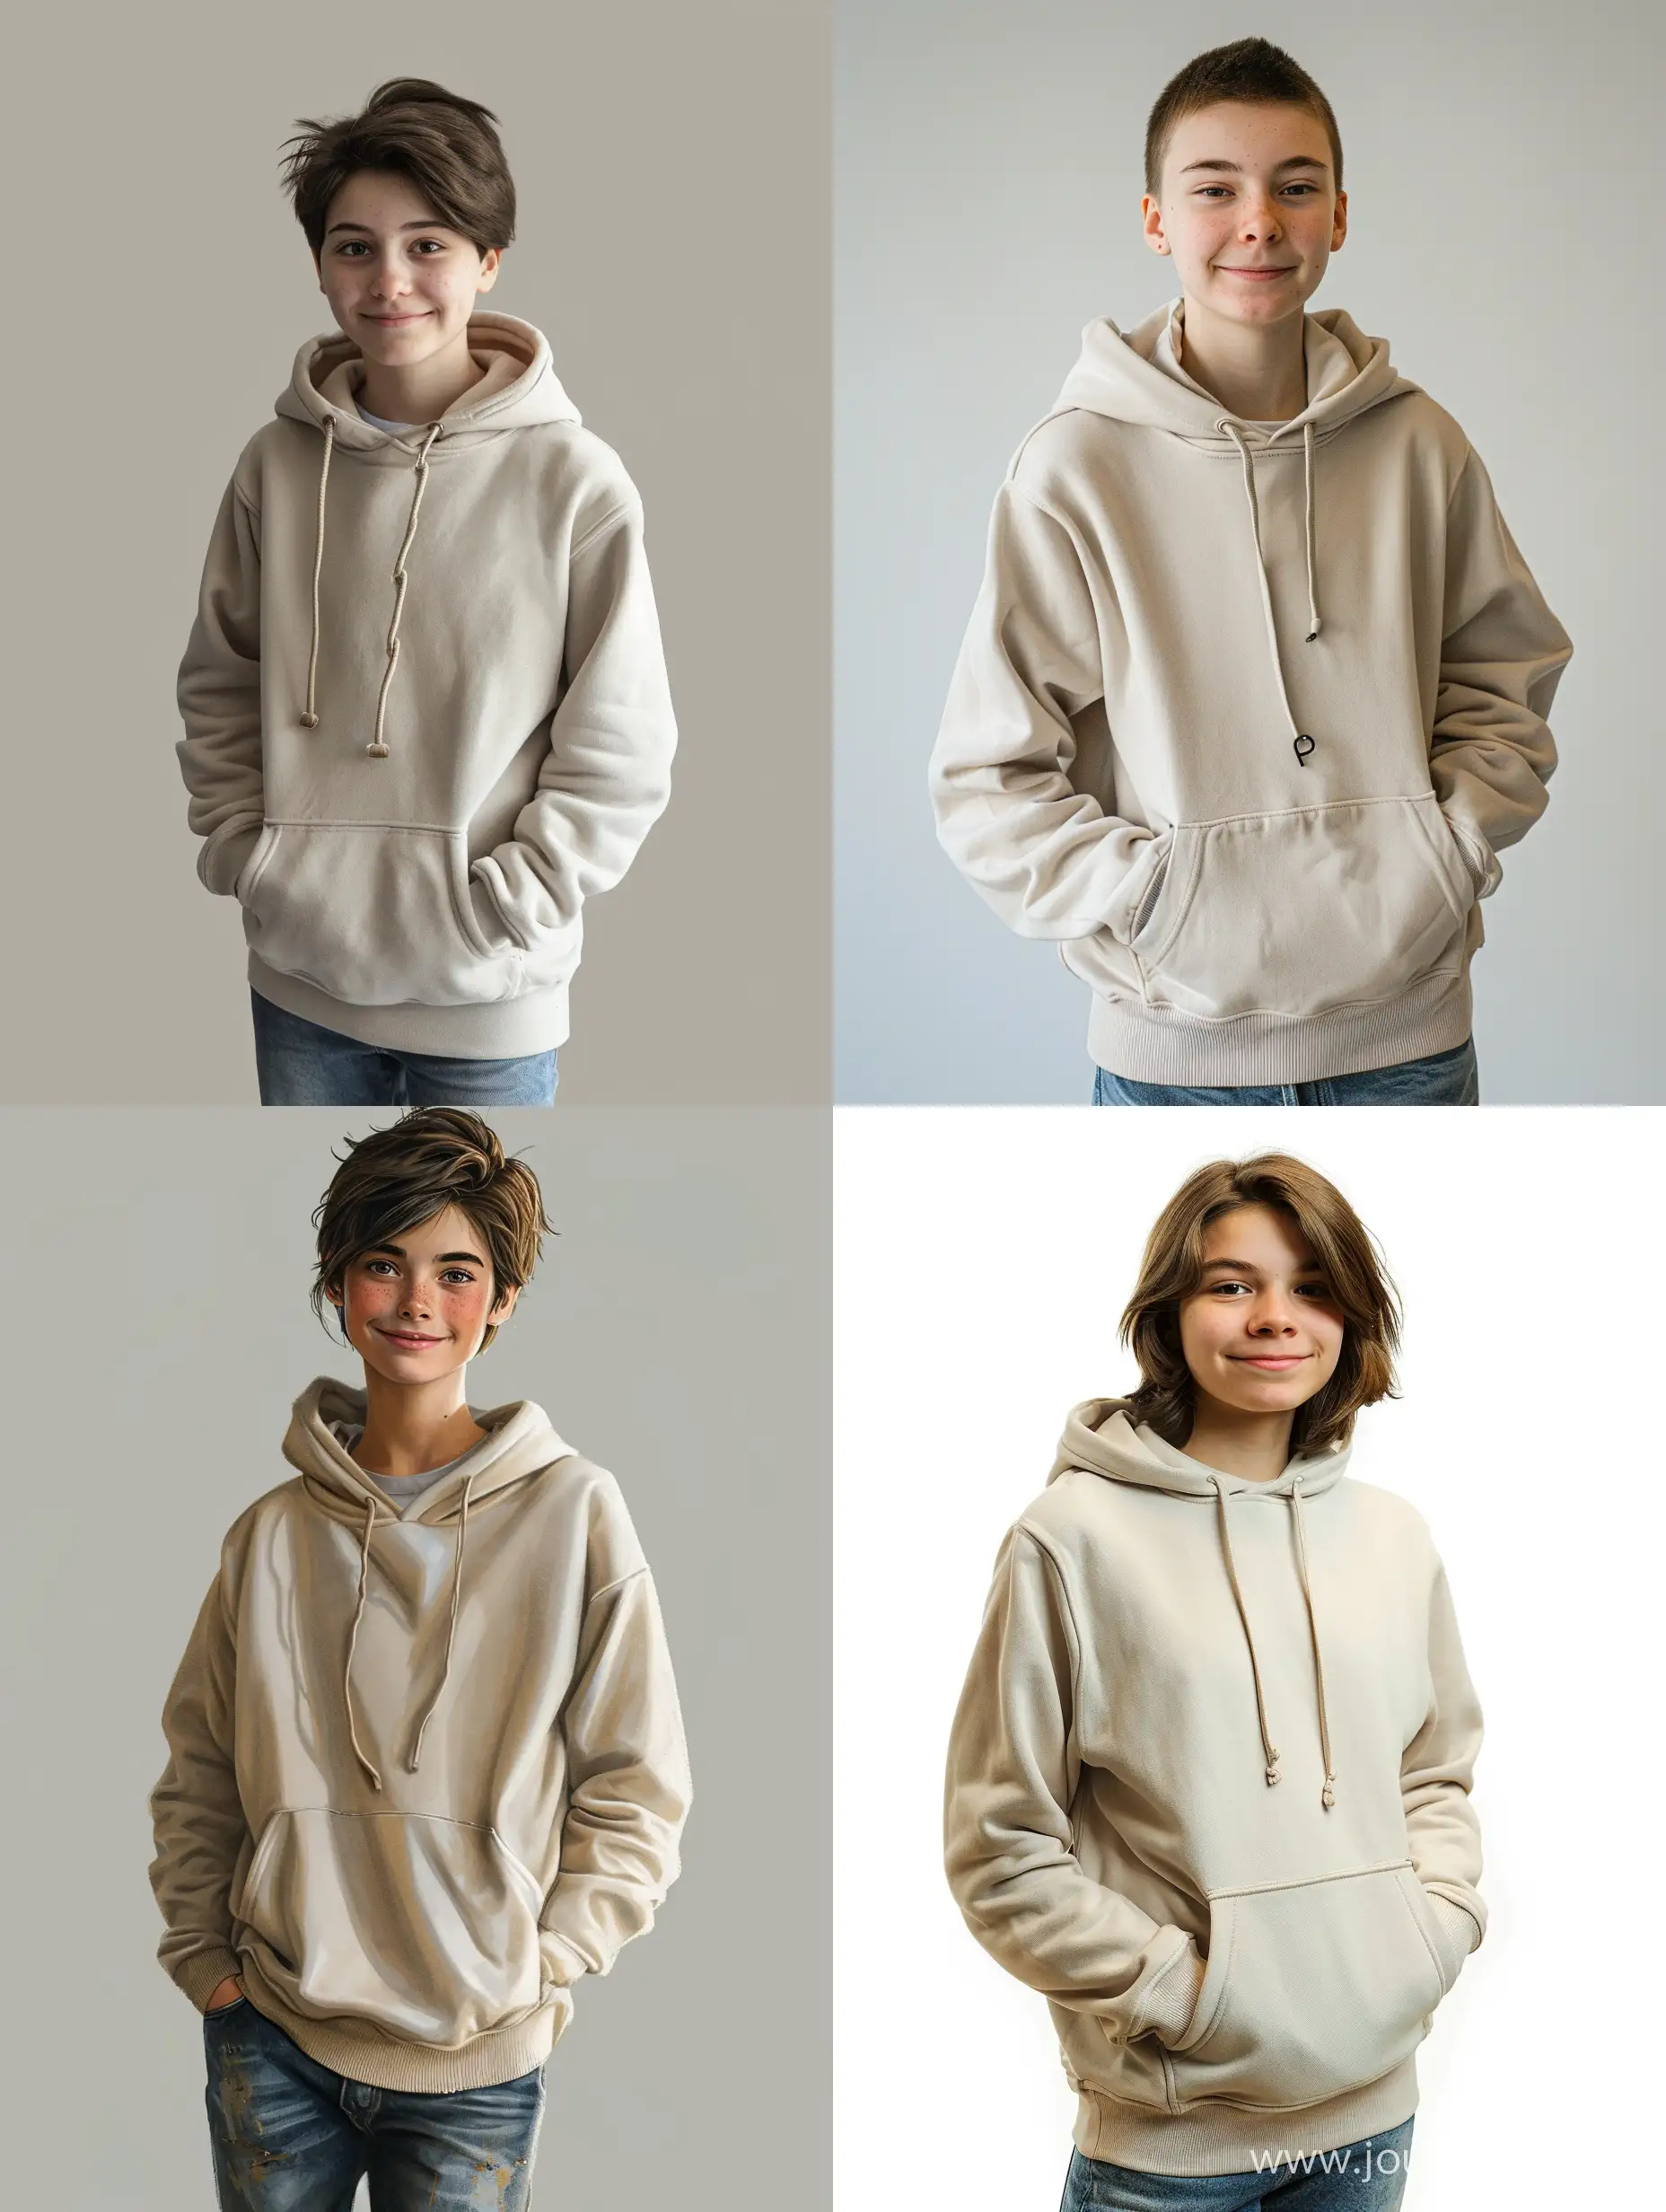 Cheerful-14YearOld-Boy-in-Beige-Hoodie-and-Jeans-Smiling-for-the-Camera